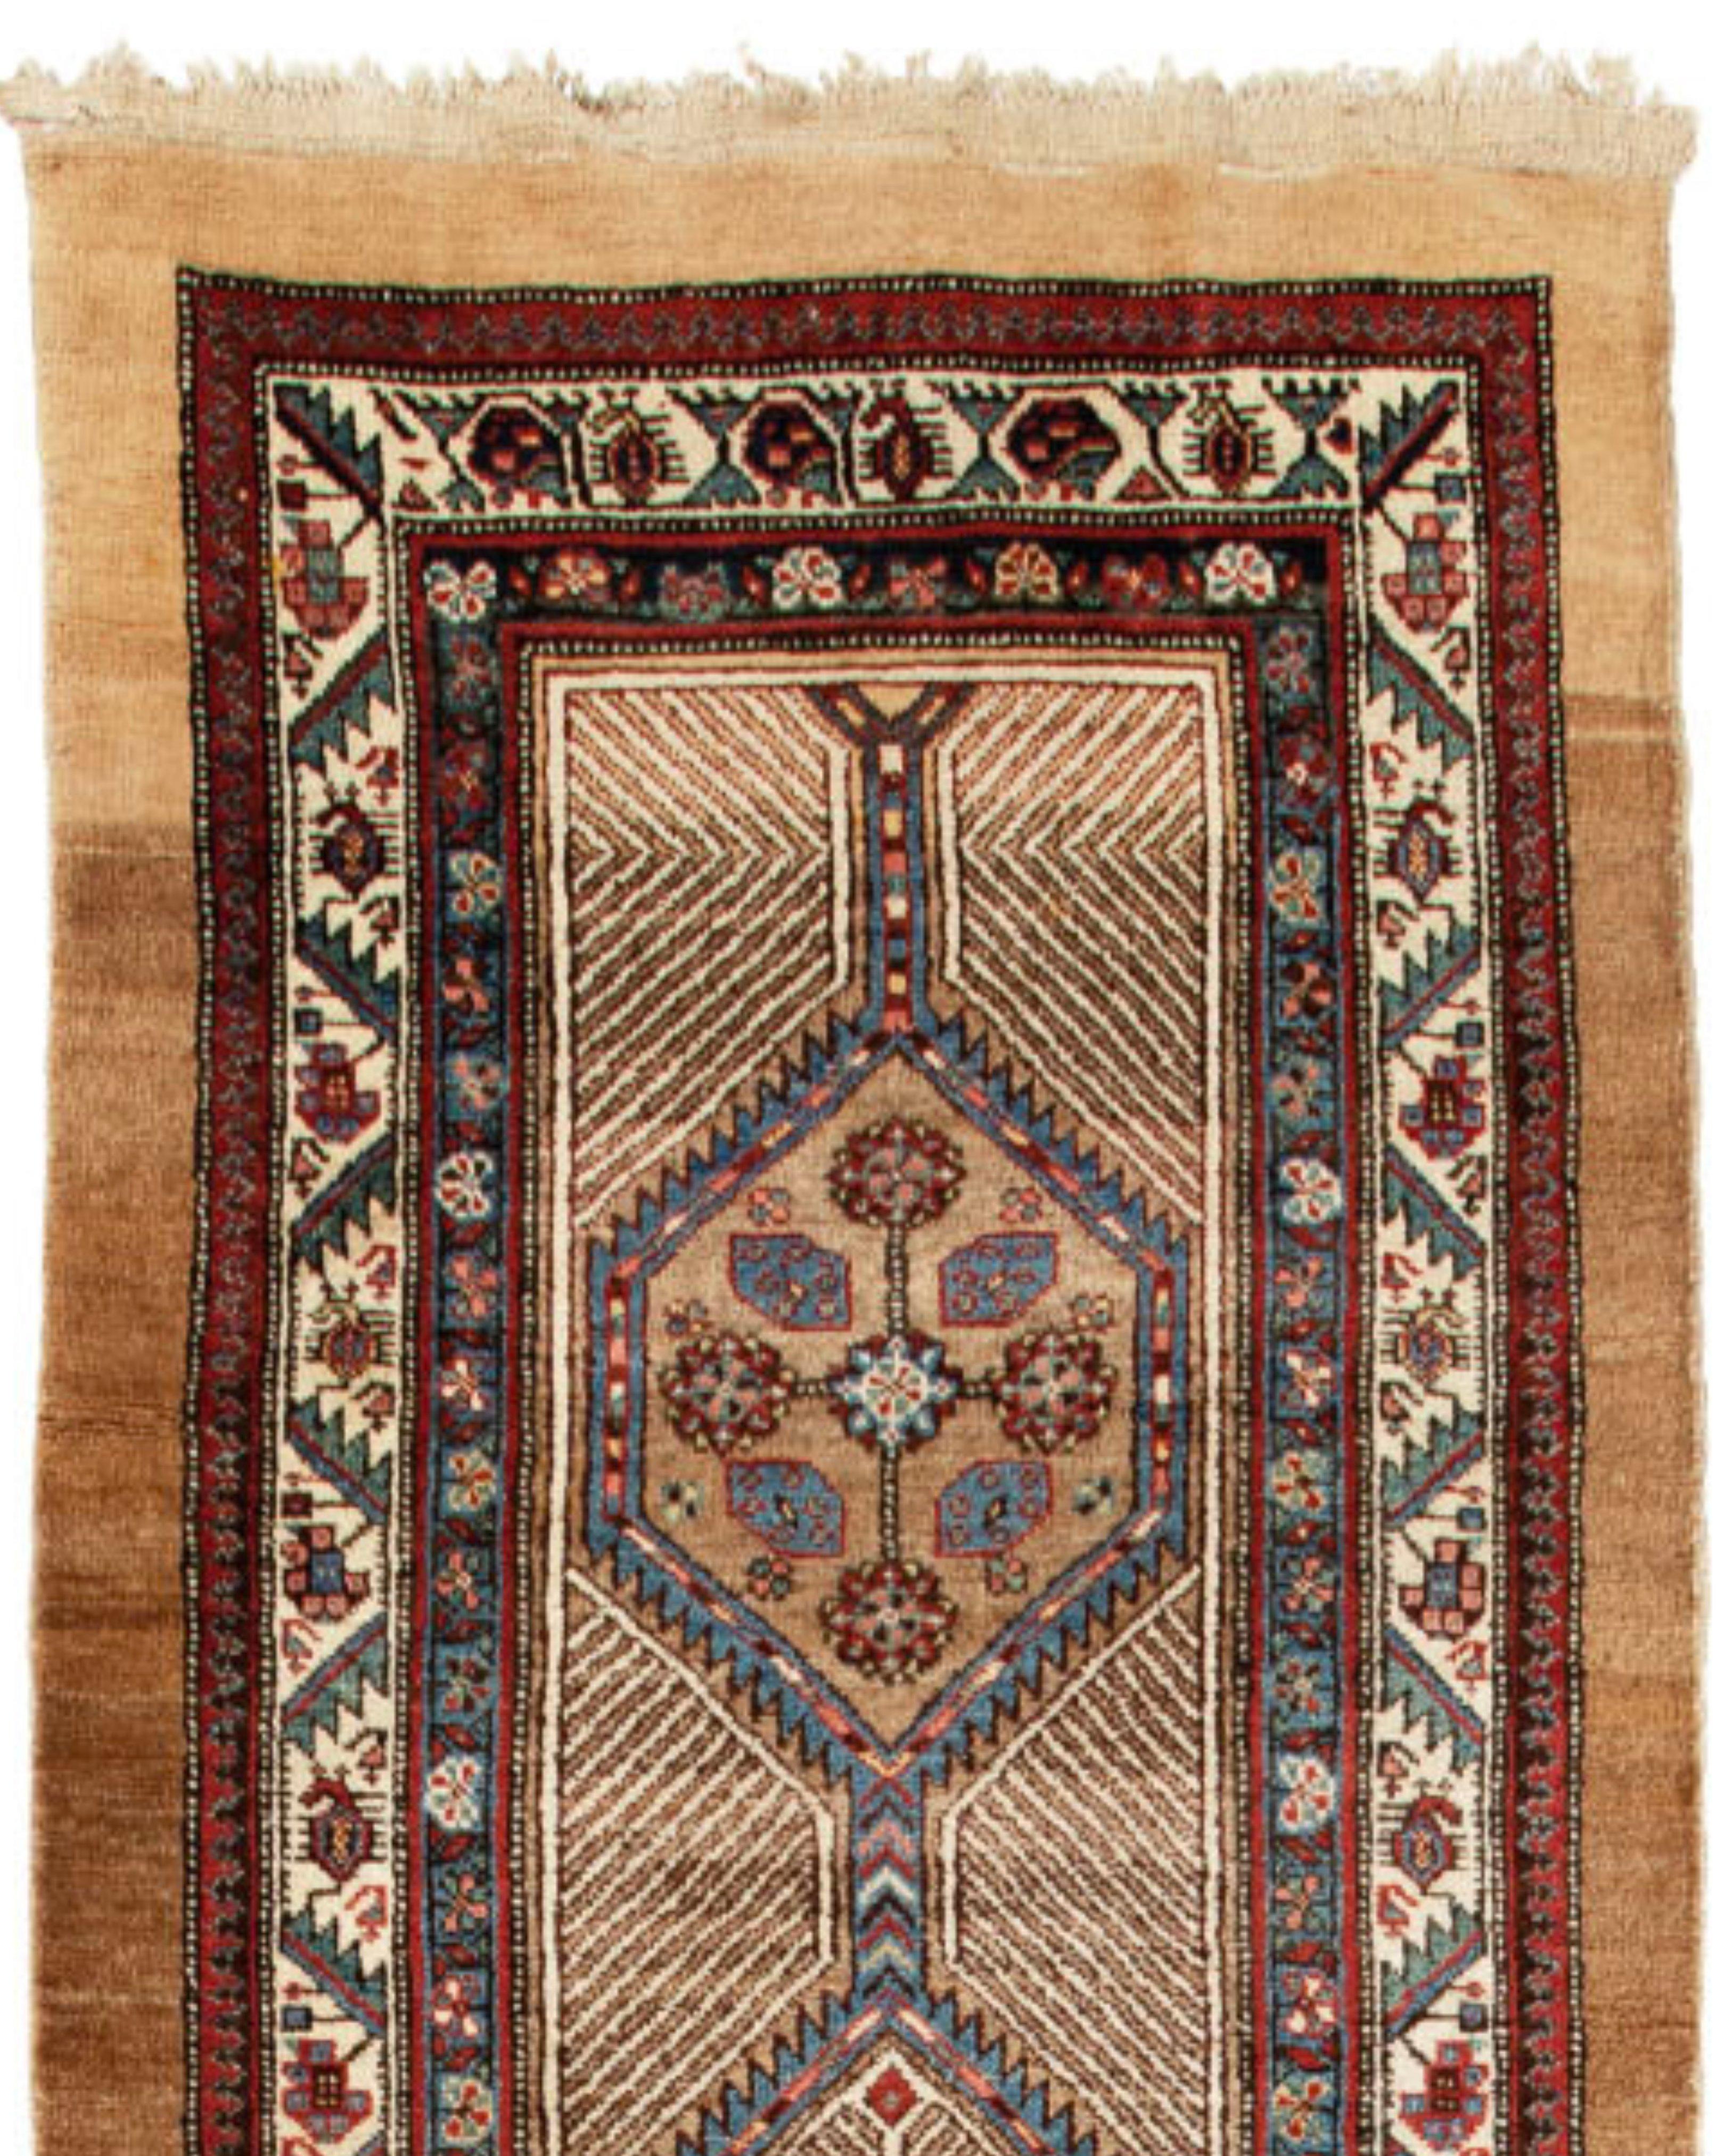 Antique Persian Serab Runner, 19th Century In Excellent Condition For Sale In San Francisco, CA